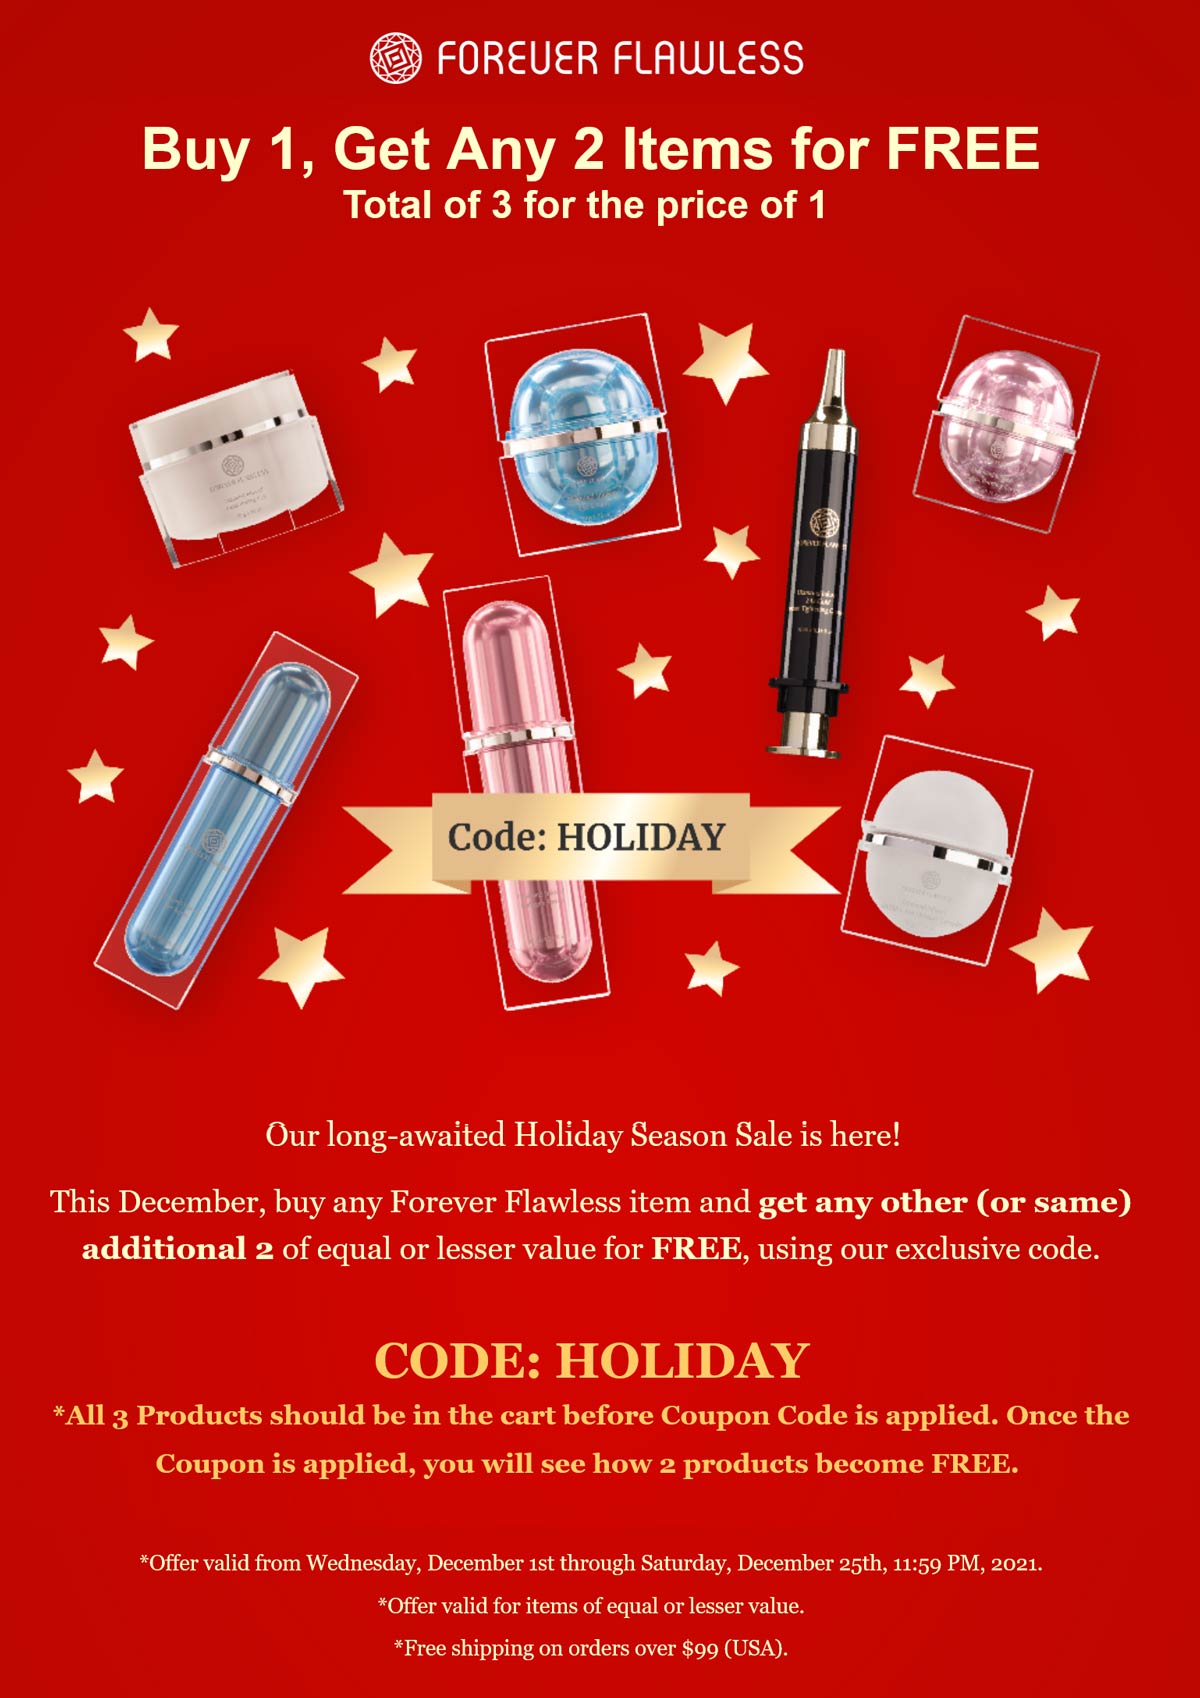 Forever Flawless stores Coupon  3-for-1 on everything at Forever Flawless via promo code HOLIDAY #foreverflawless 